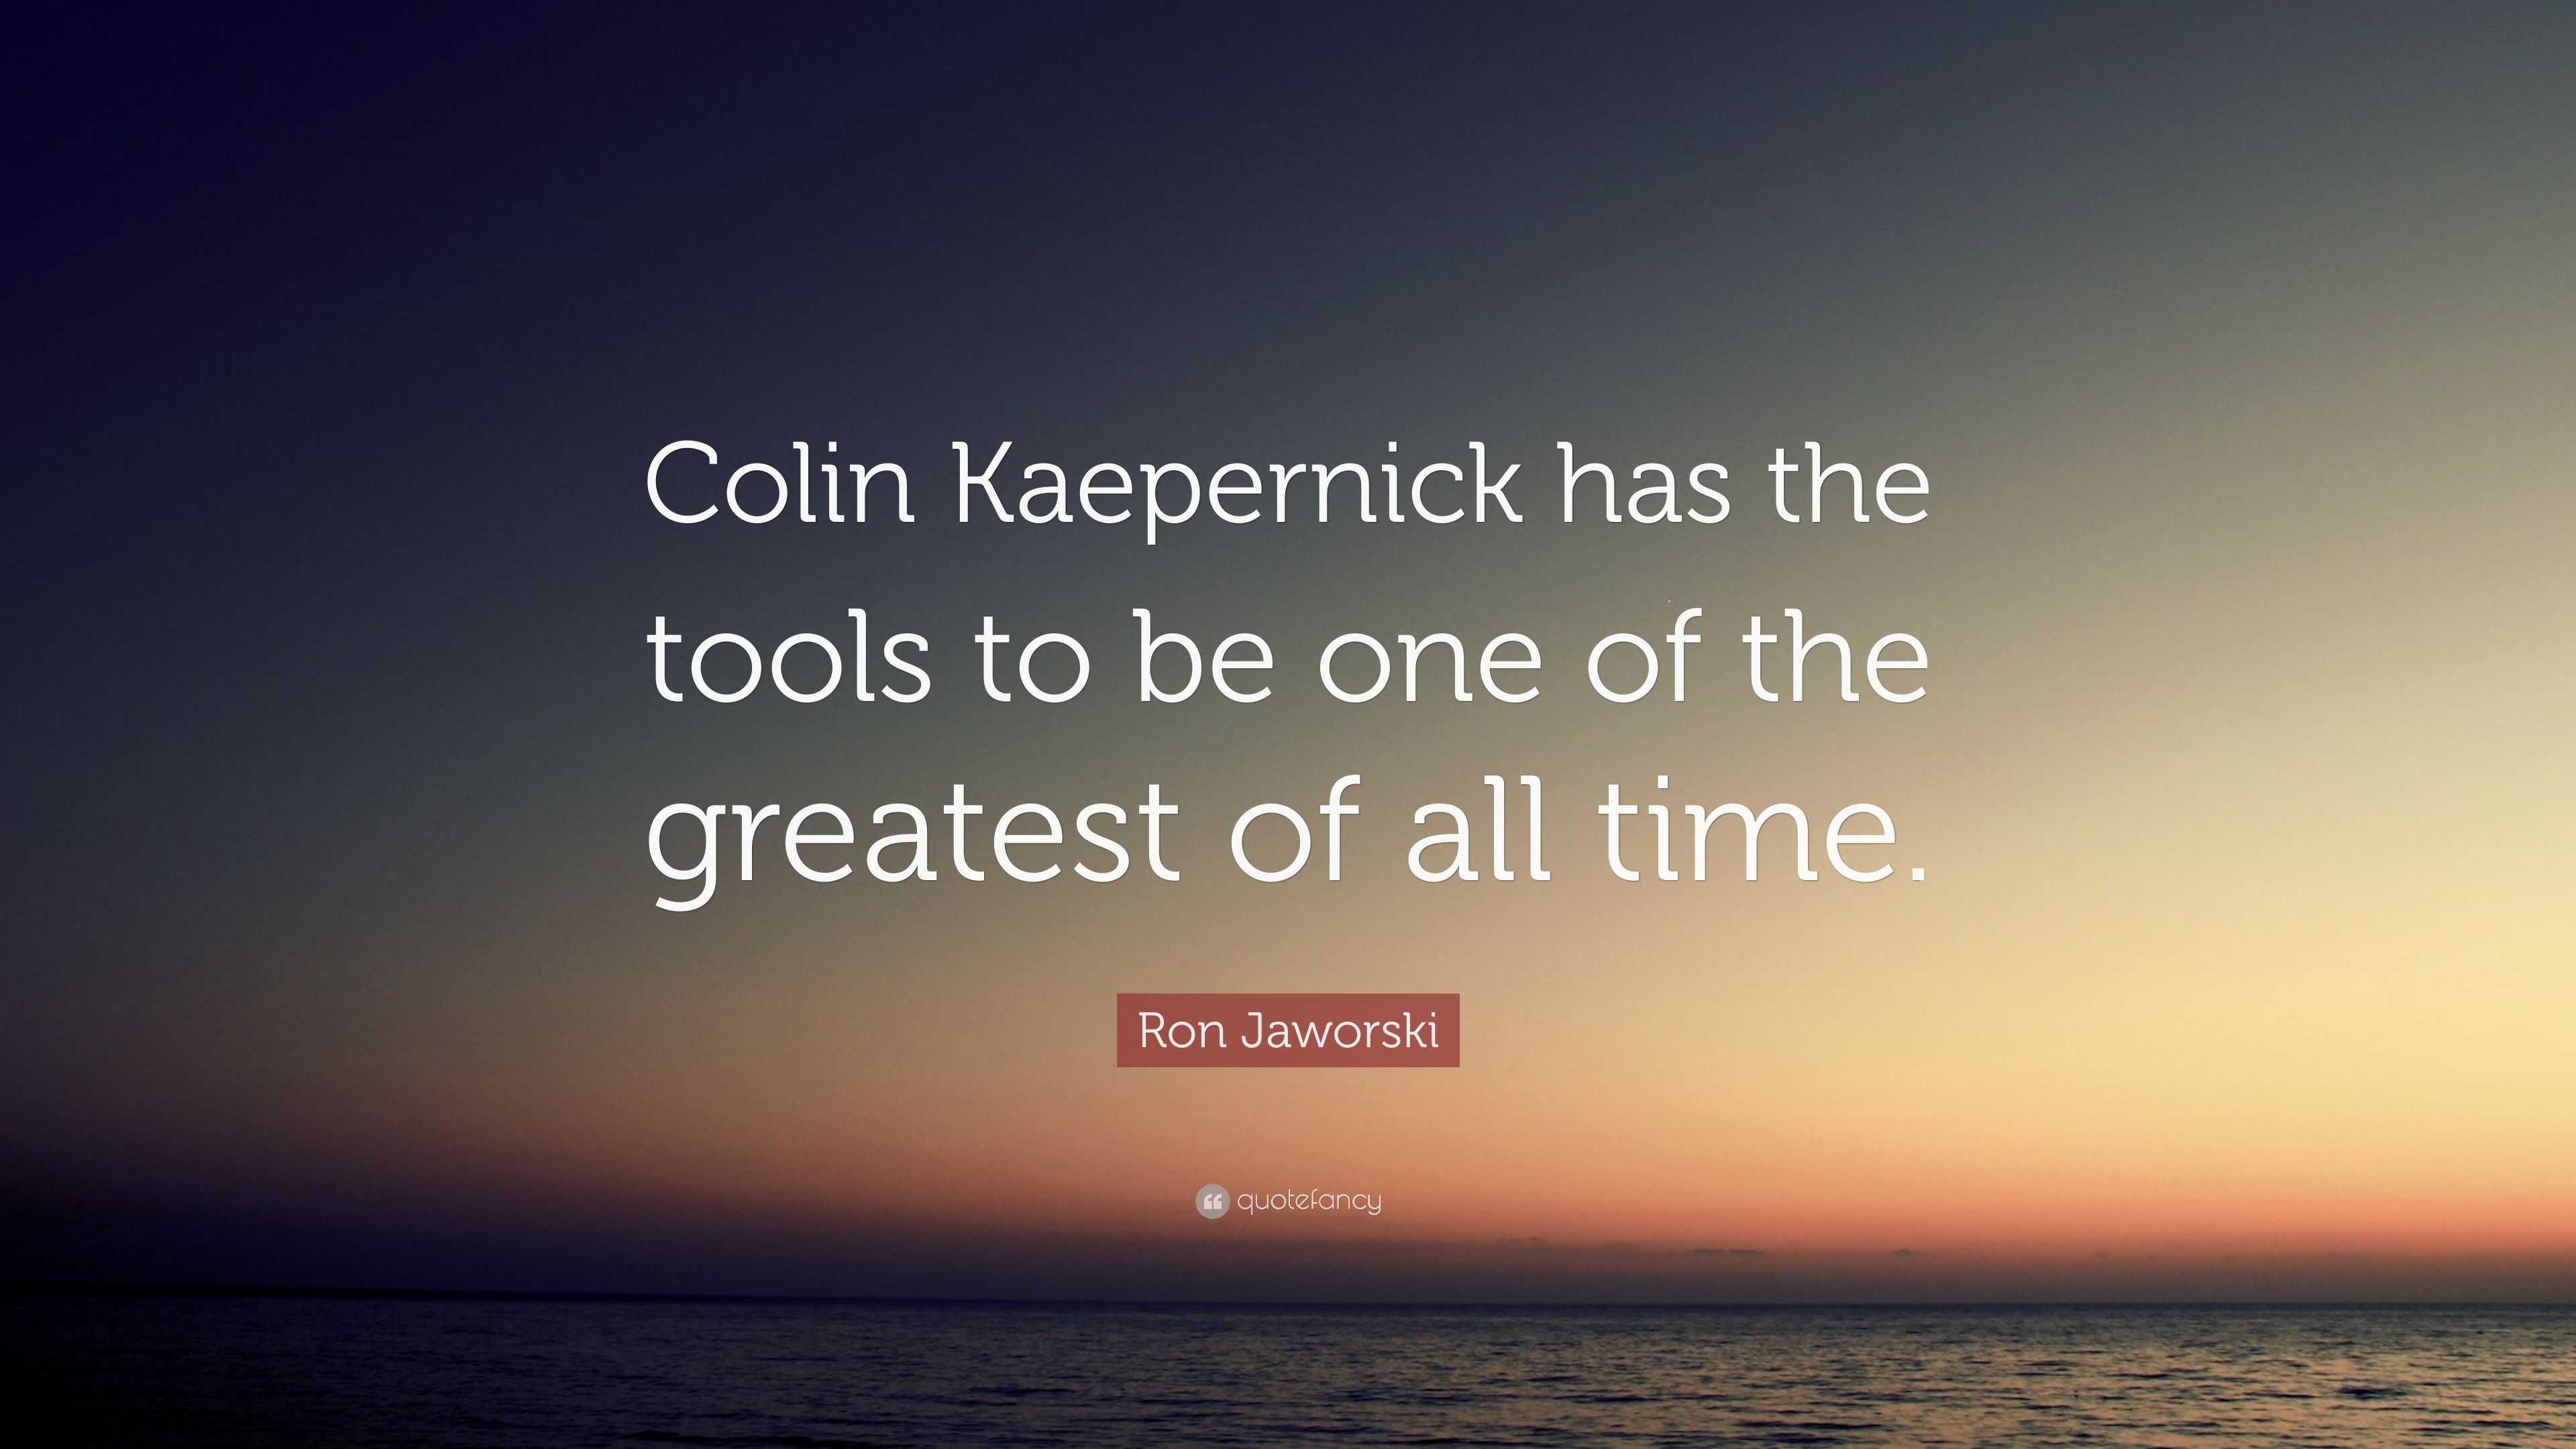 Ron Jaworski quote: I truly believe Colin Kaepernick could be one